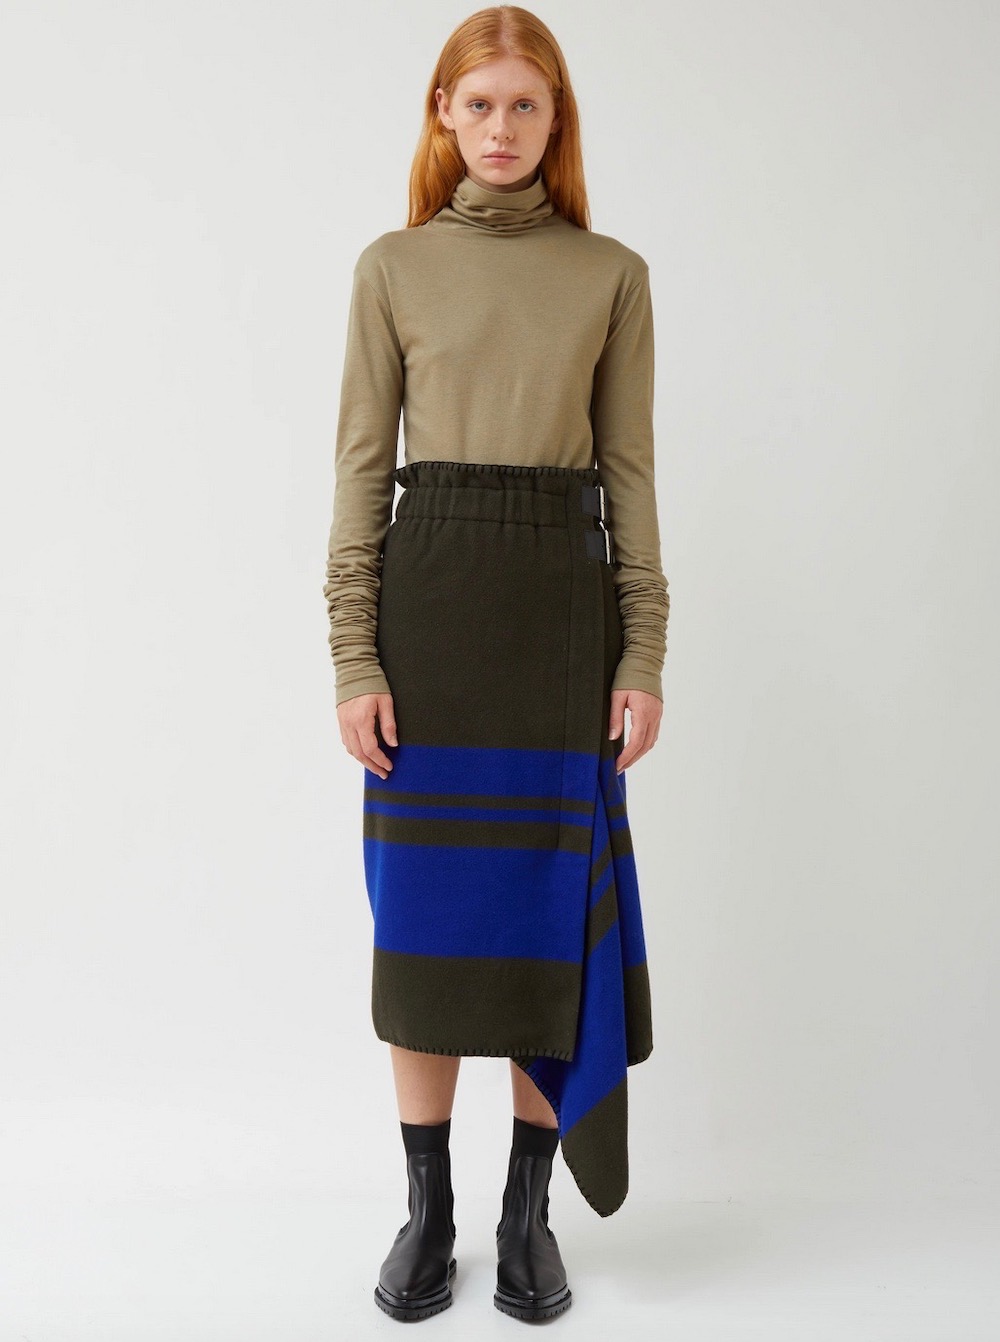 20 Skirt-and-Boots Combinations to Wear All Winter Long - theFashionSpot